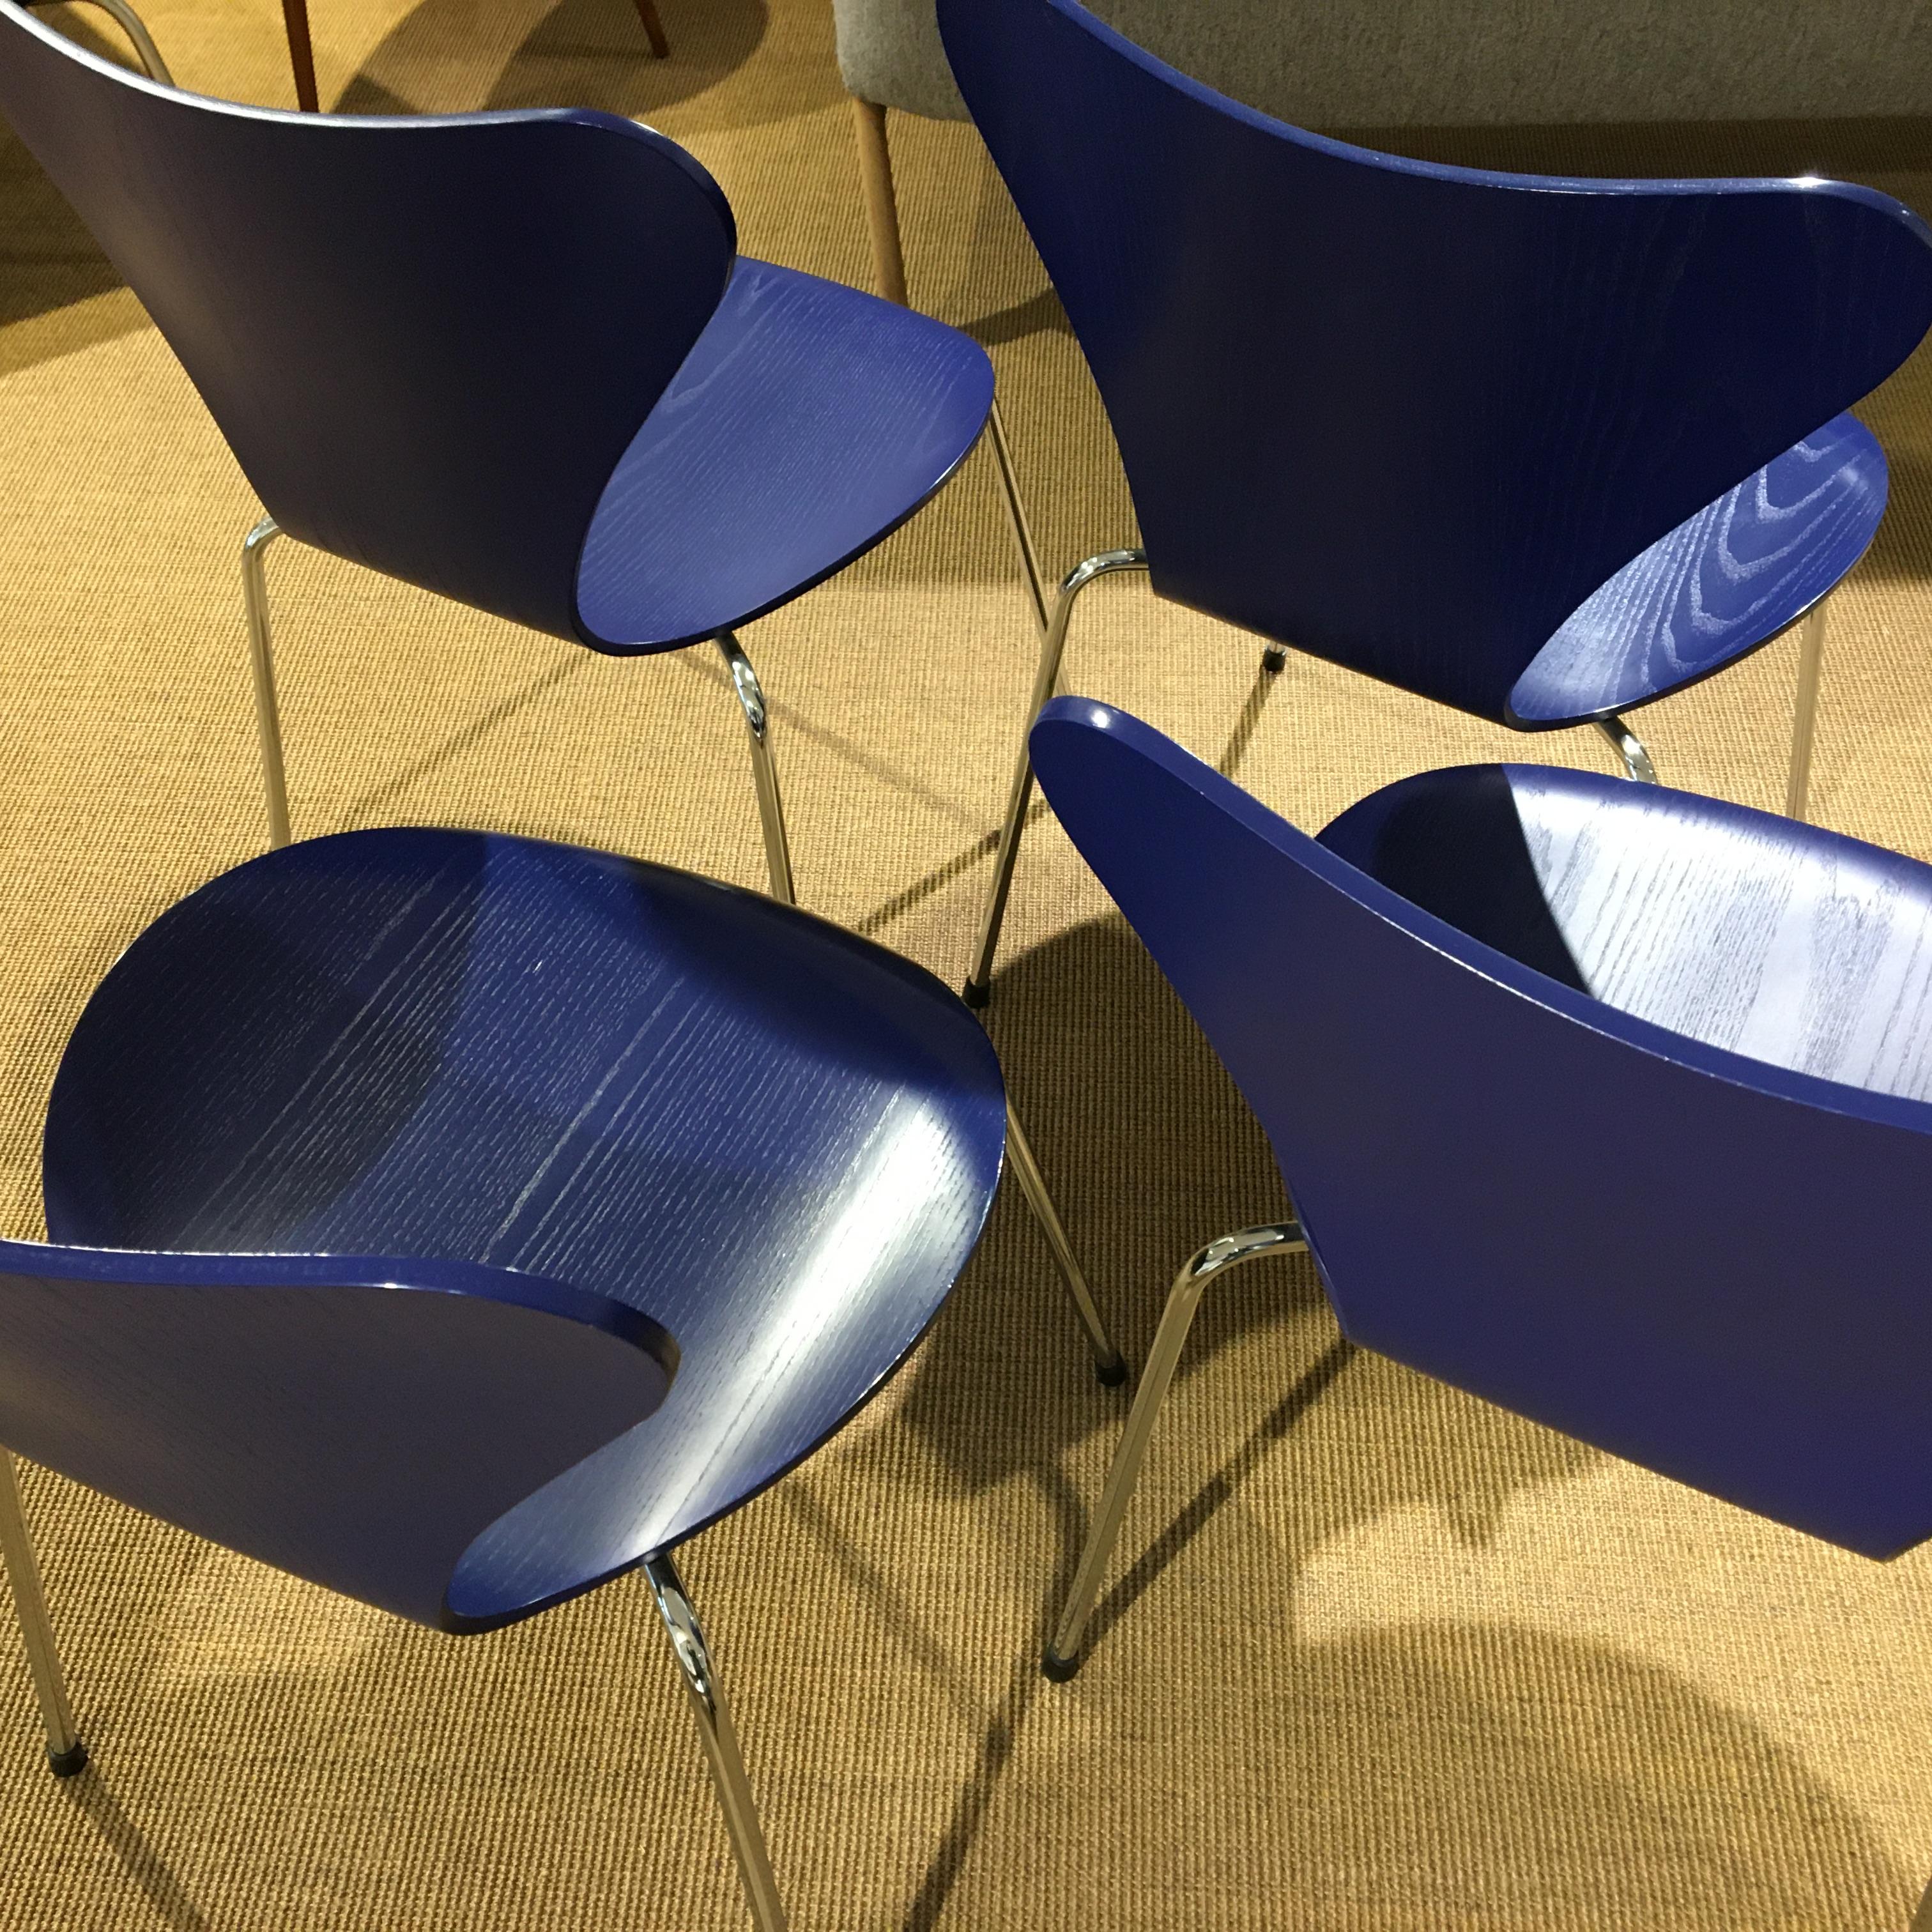 Mid-20th Century Arne Jacobsen Dining Chairs 4 Pcs, Aj 3107 in Blue